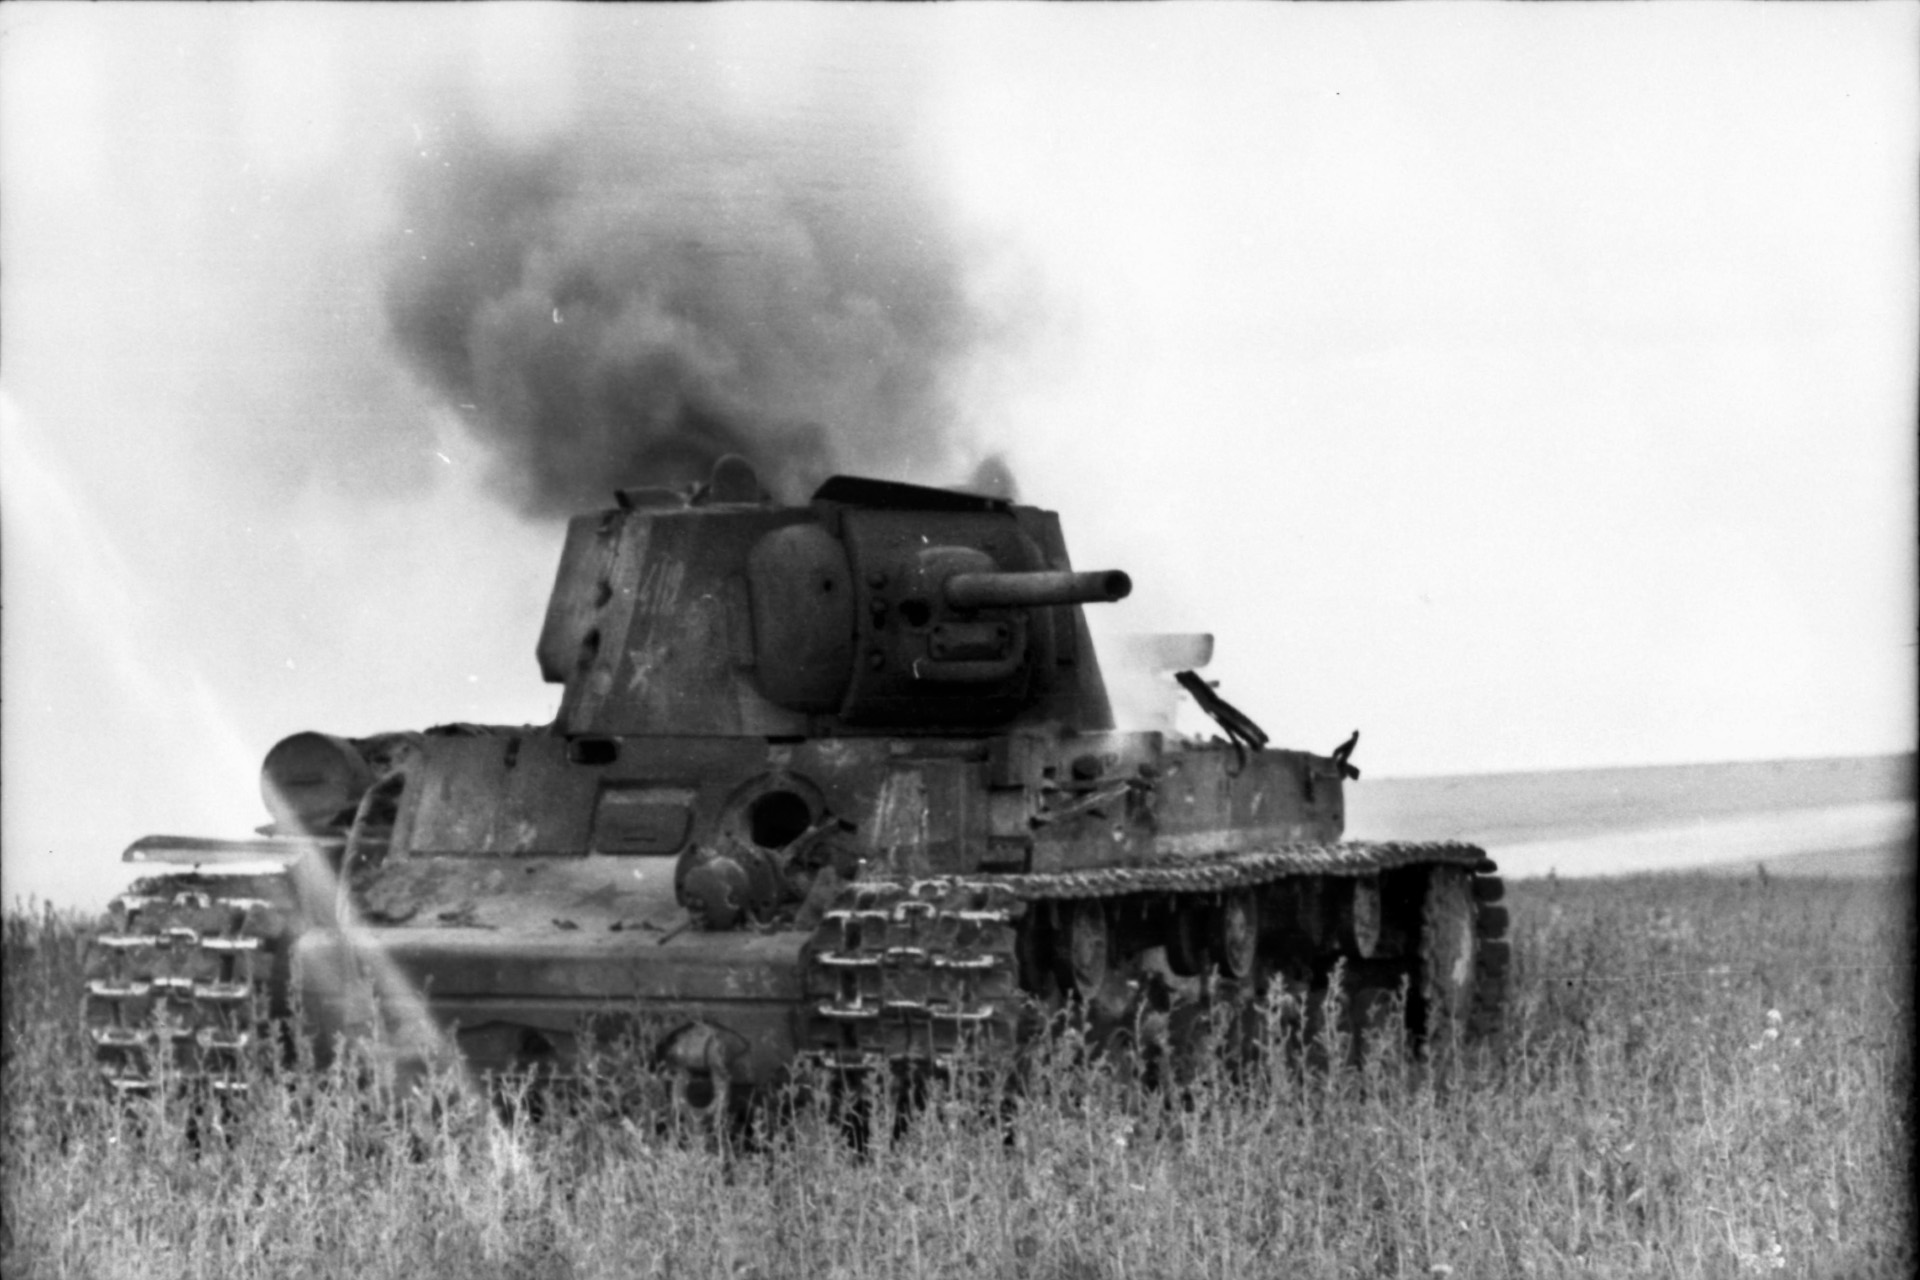 A Soviet tank, destroyed in a futile attempt to stem the Nazi tide during the early days of Case Blue, billows smoke on the Russian steppe.